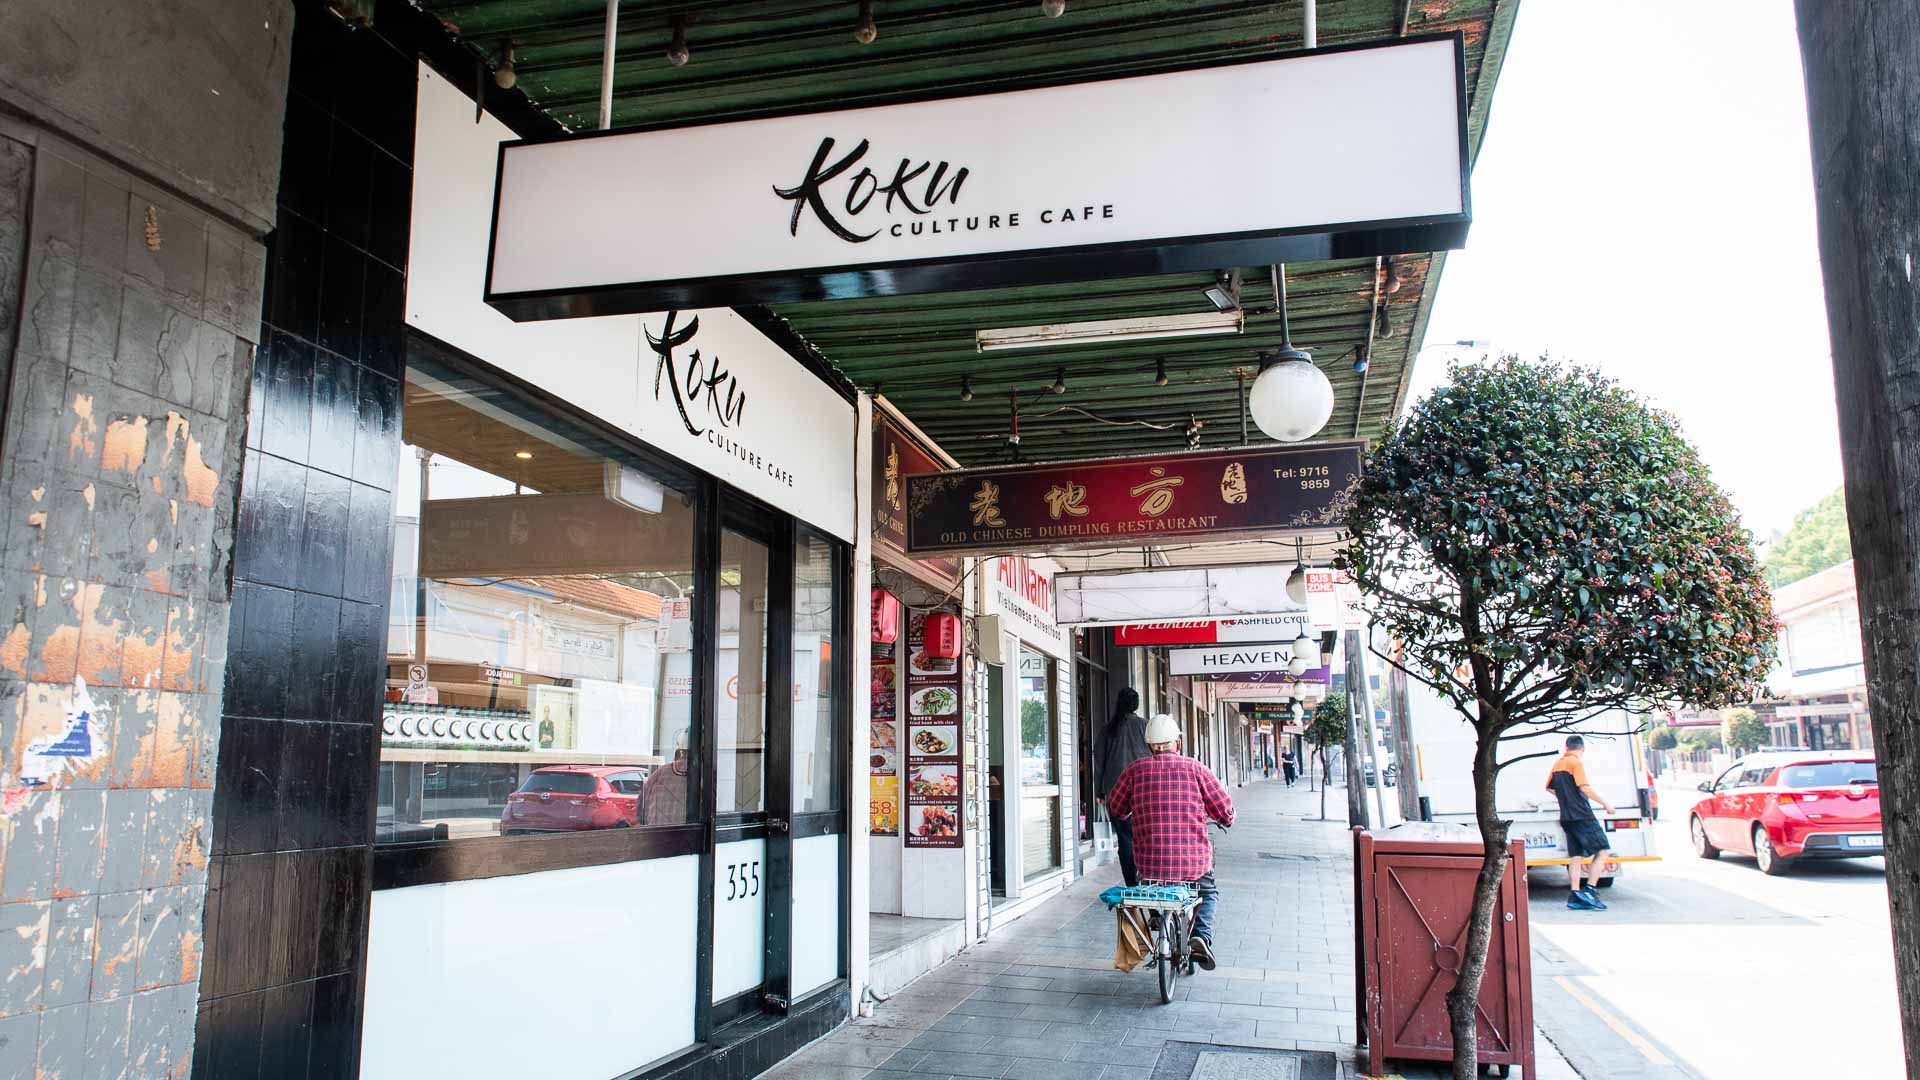 Koku Culture Is Ashfield's Japanese Cafe and Miso Shop Serving Up Fluffy Matcha Pancakes